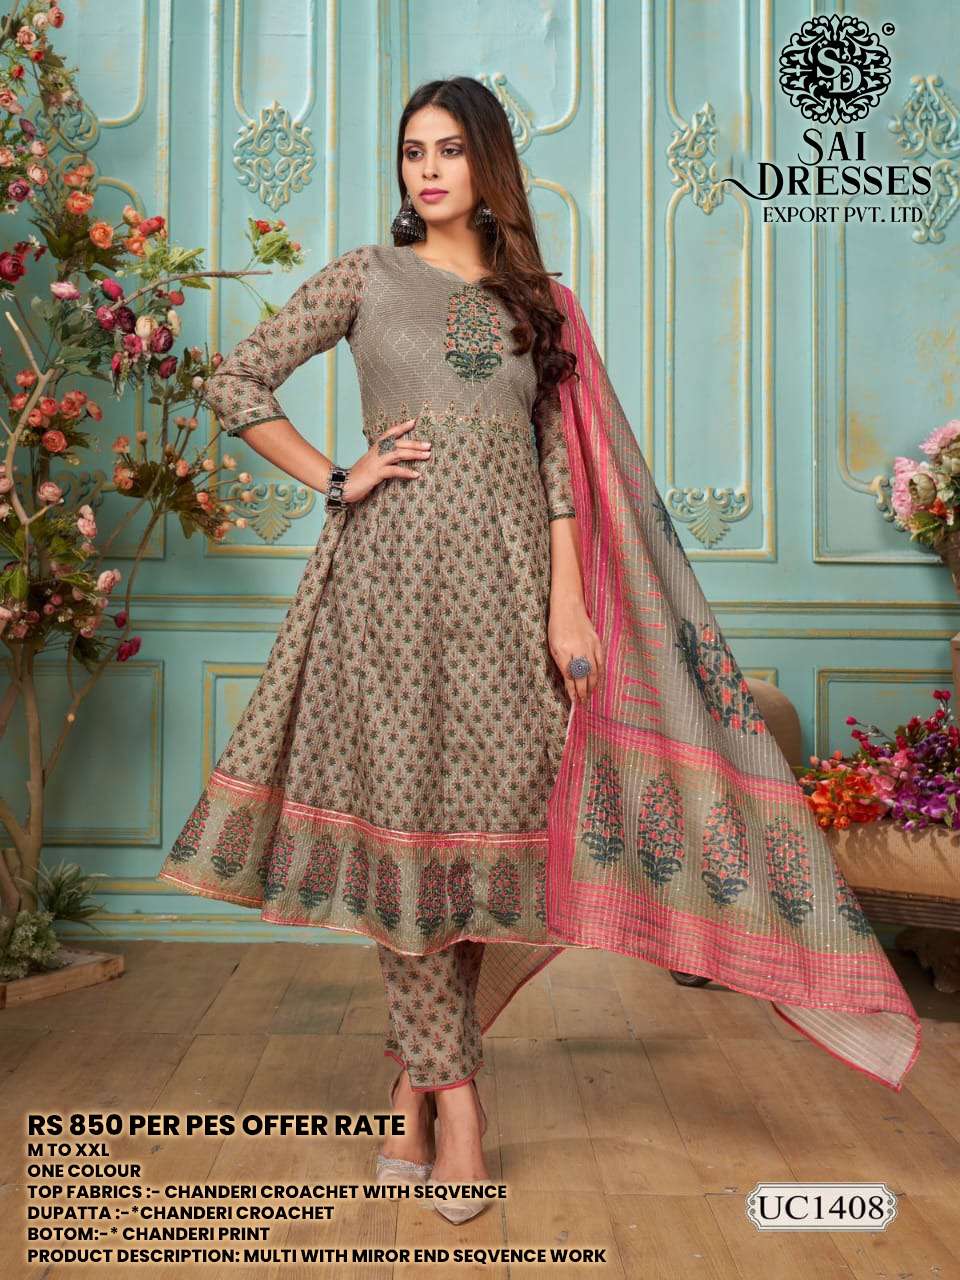 SAI DRESSES PRESENT D.NO UC1408 READY TO ETHNIC WEAR ANARKALI STYLE DESIGNER 3 PIECE COMBO SUITS IN WHOLESALE RATE IN SURAT